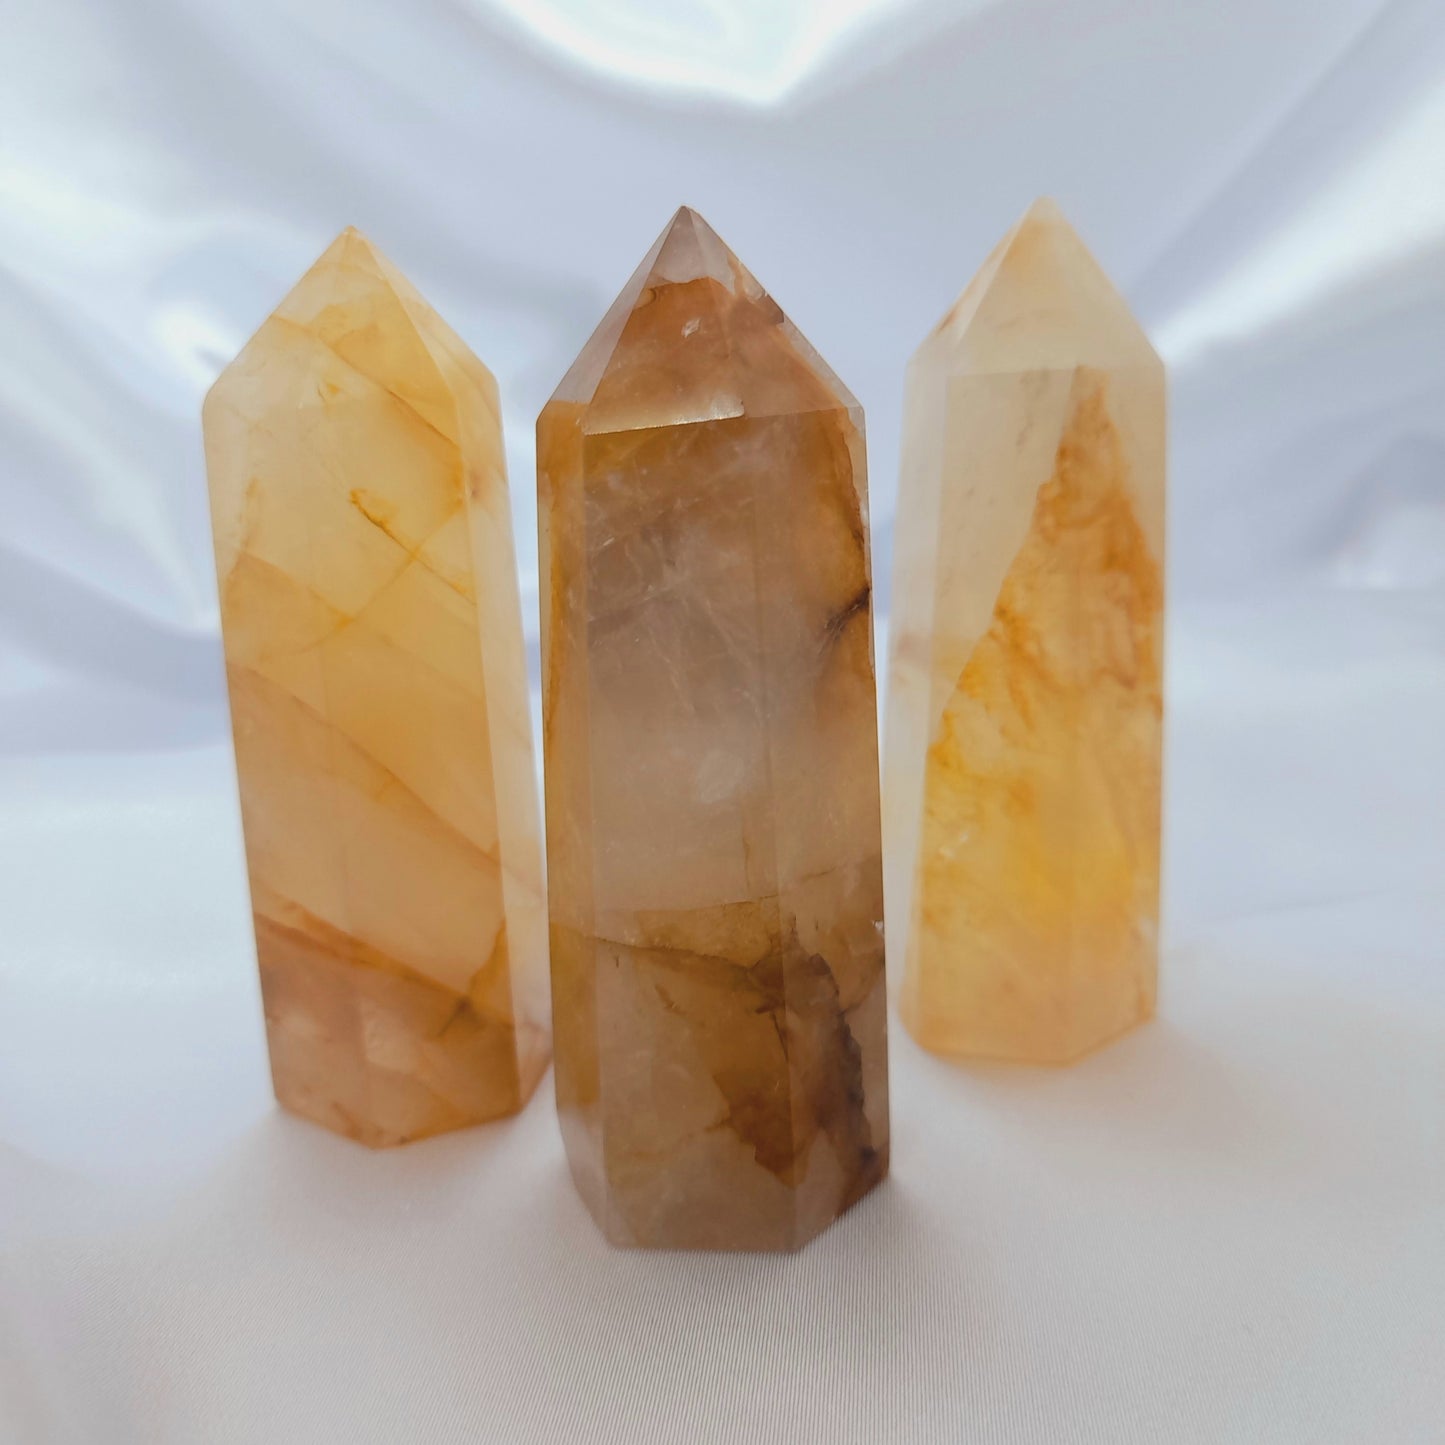 Golden Healer Crystal Point: A transformative gem with radiant golden hues, symbolizing purity and divine connection. Known for holistic healing in spiritual, mental, emotional, and interdimensional realms. Each crystal is unique; sizes and markings may vary. Price is for one crystal, inviting the profound healing energy of the Golden Healer into your life.